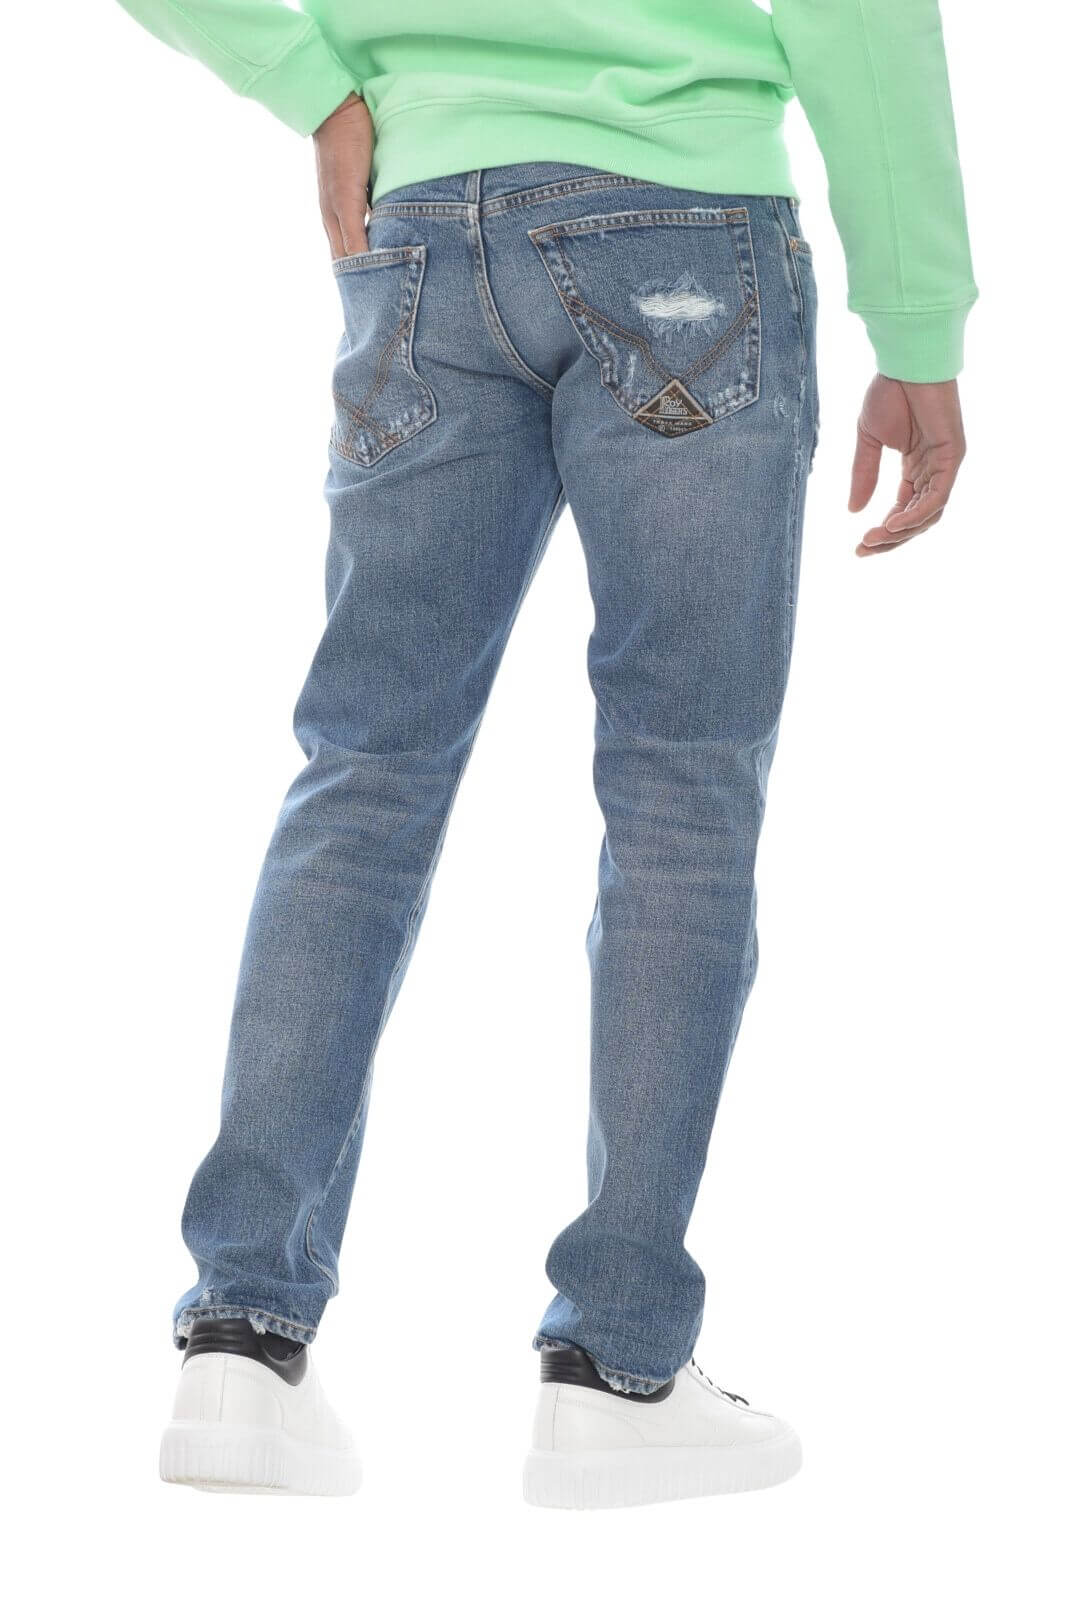 Roy Roger’s Jeans Uomo Cult MAN